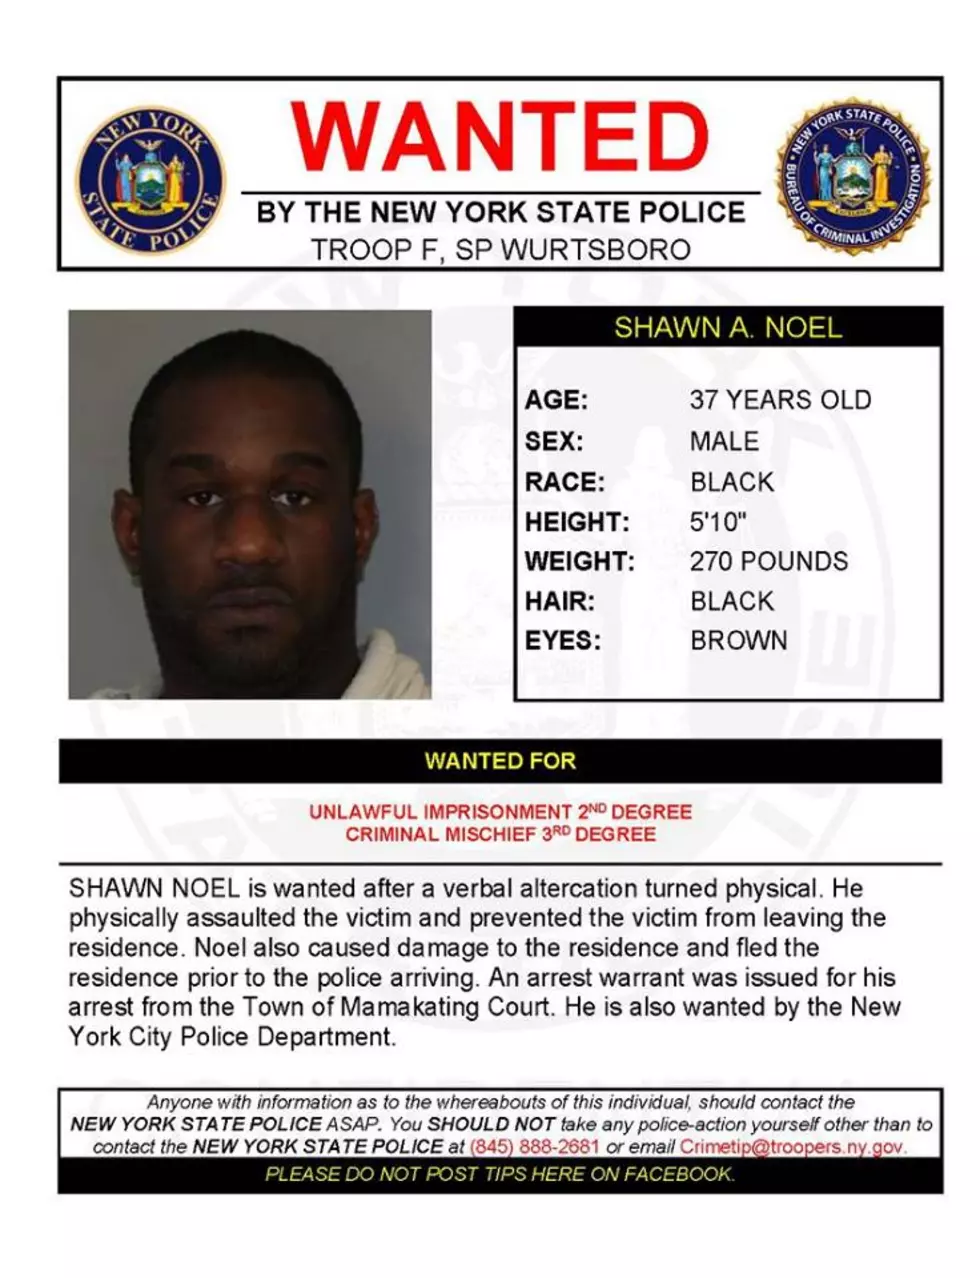 Warrant Wednesday: Sullivan County Man Wanted For Unlawful Imprisonment